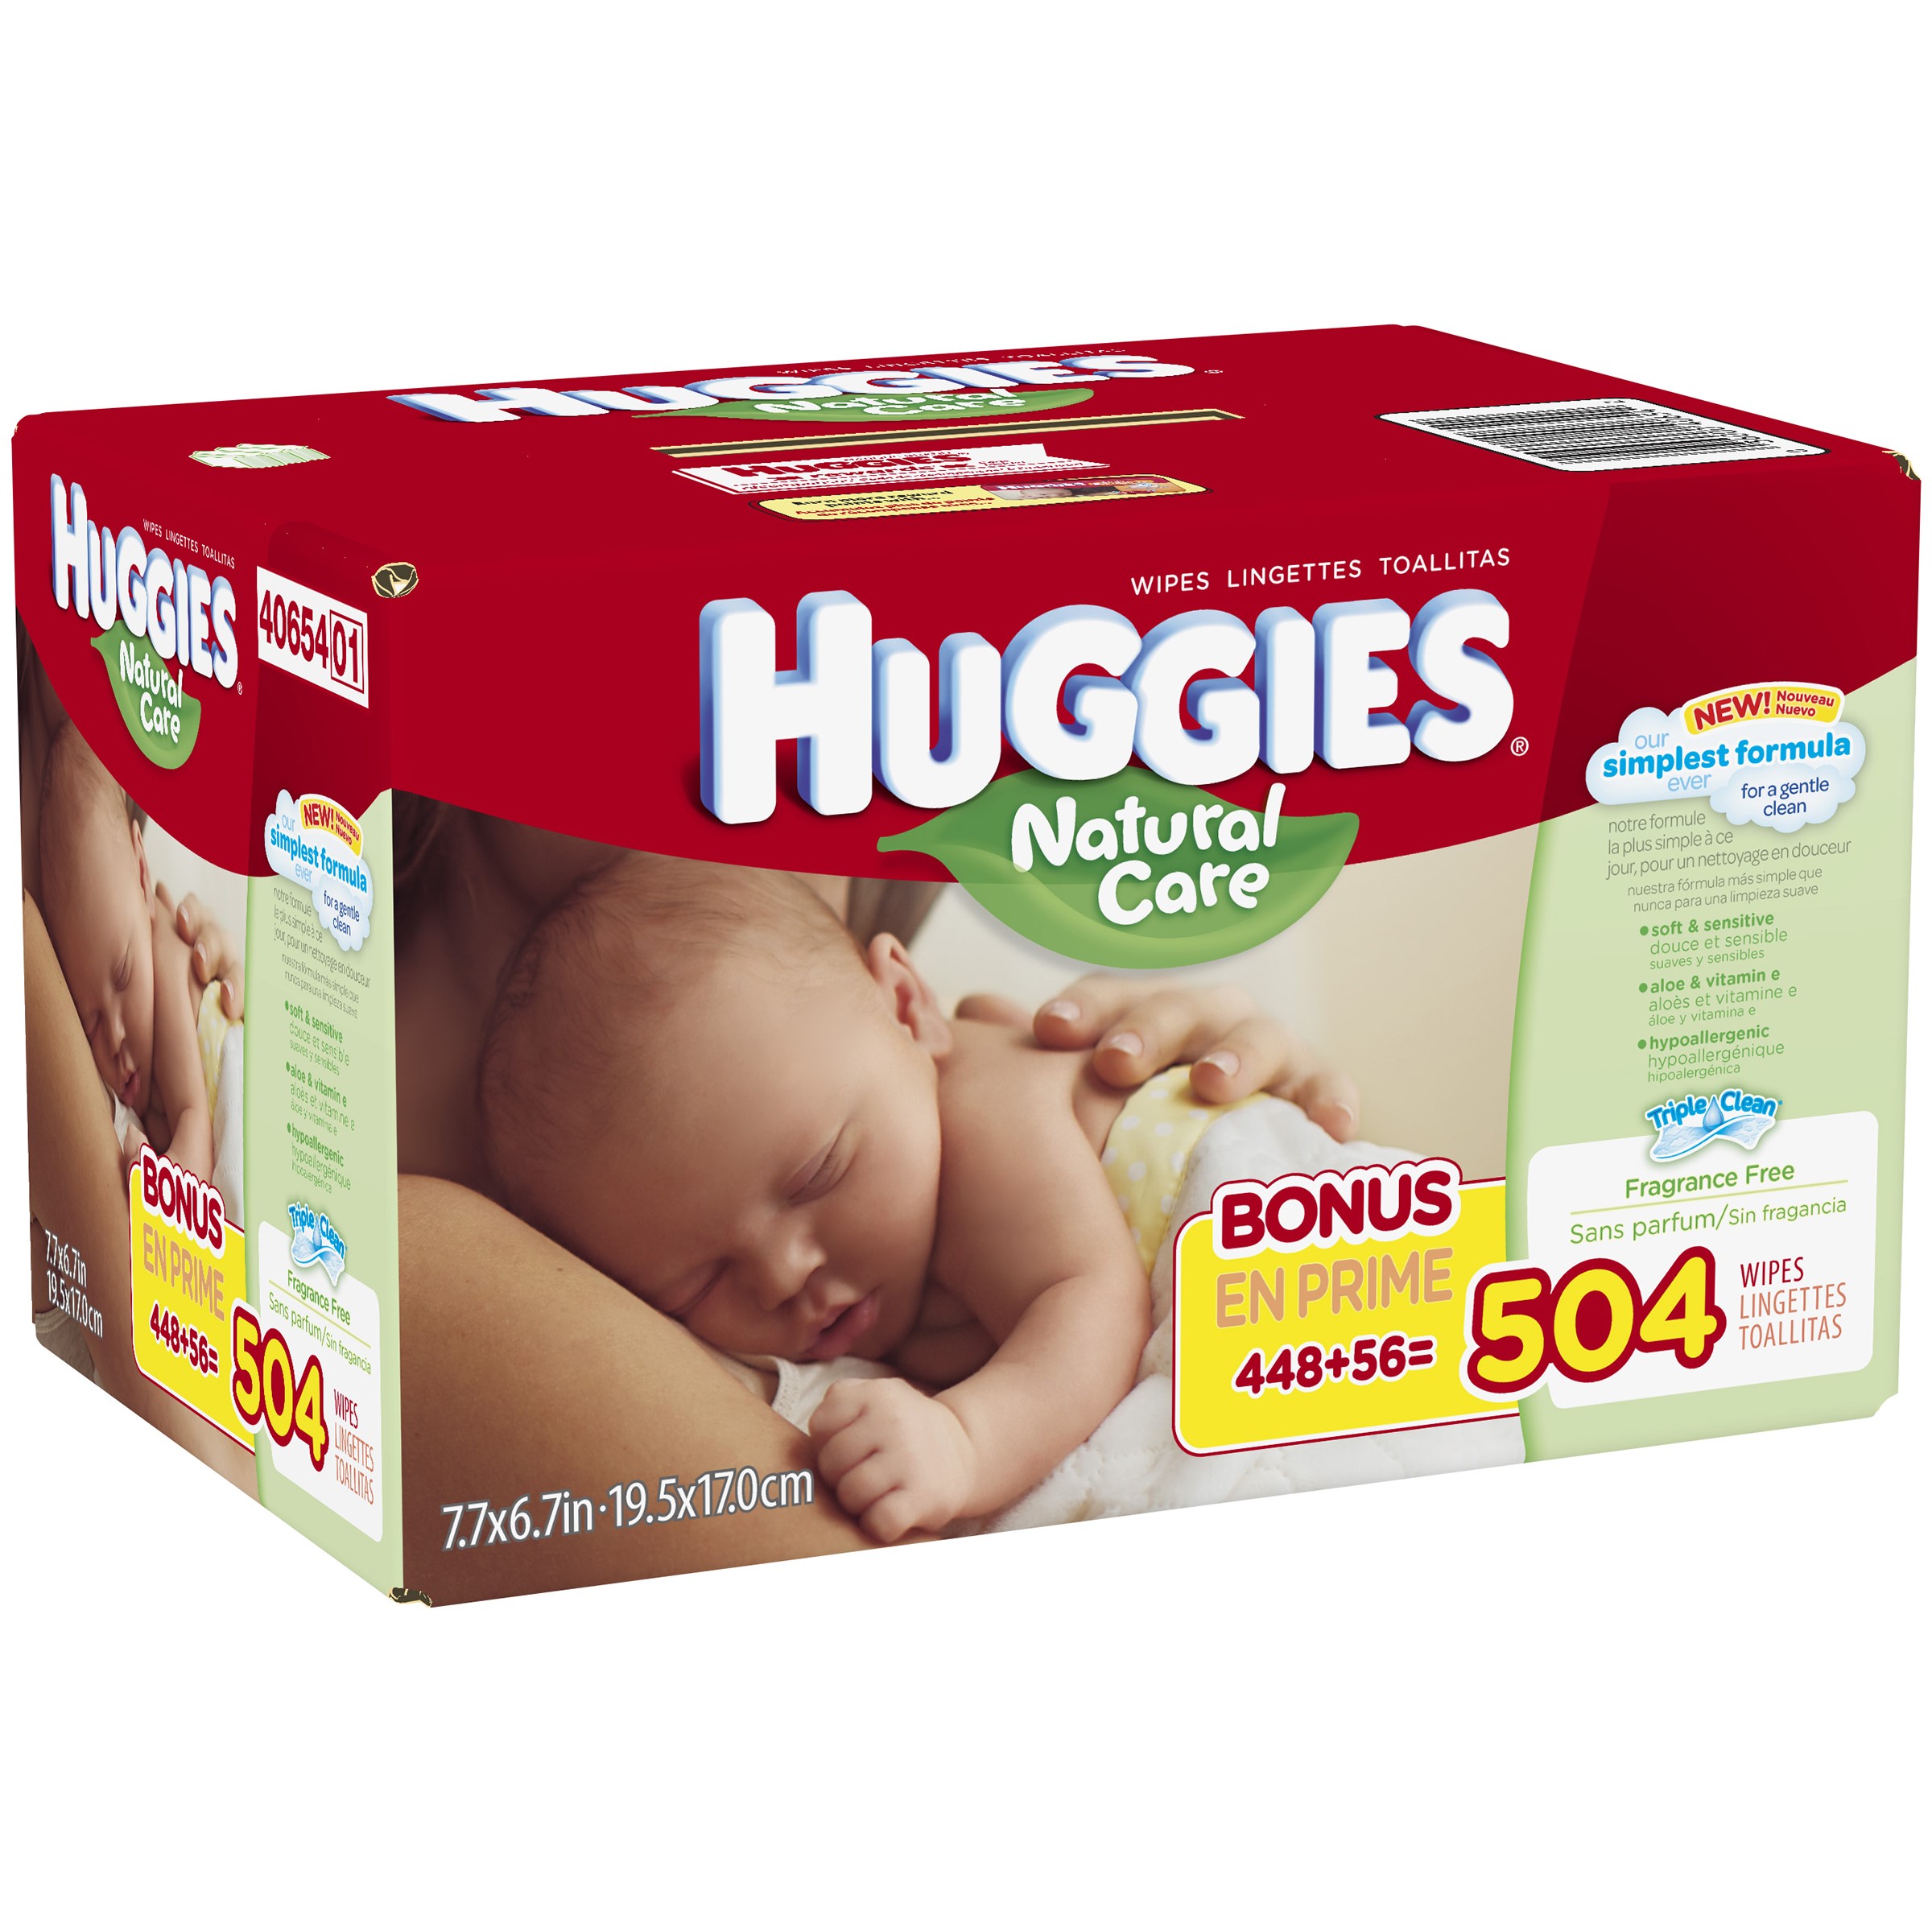 Huggies Natural Care 504 Count - image 1 of 3